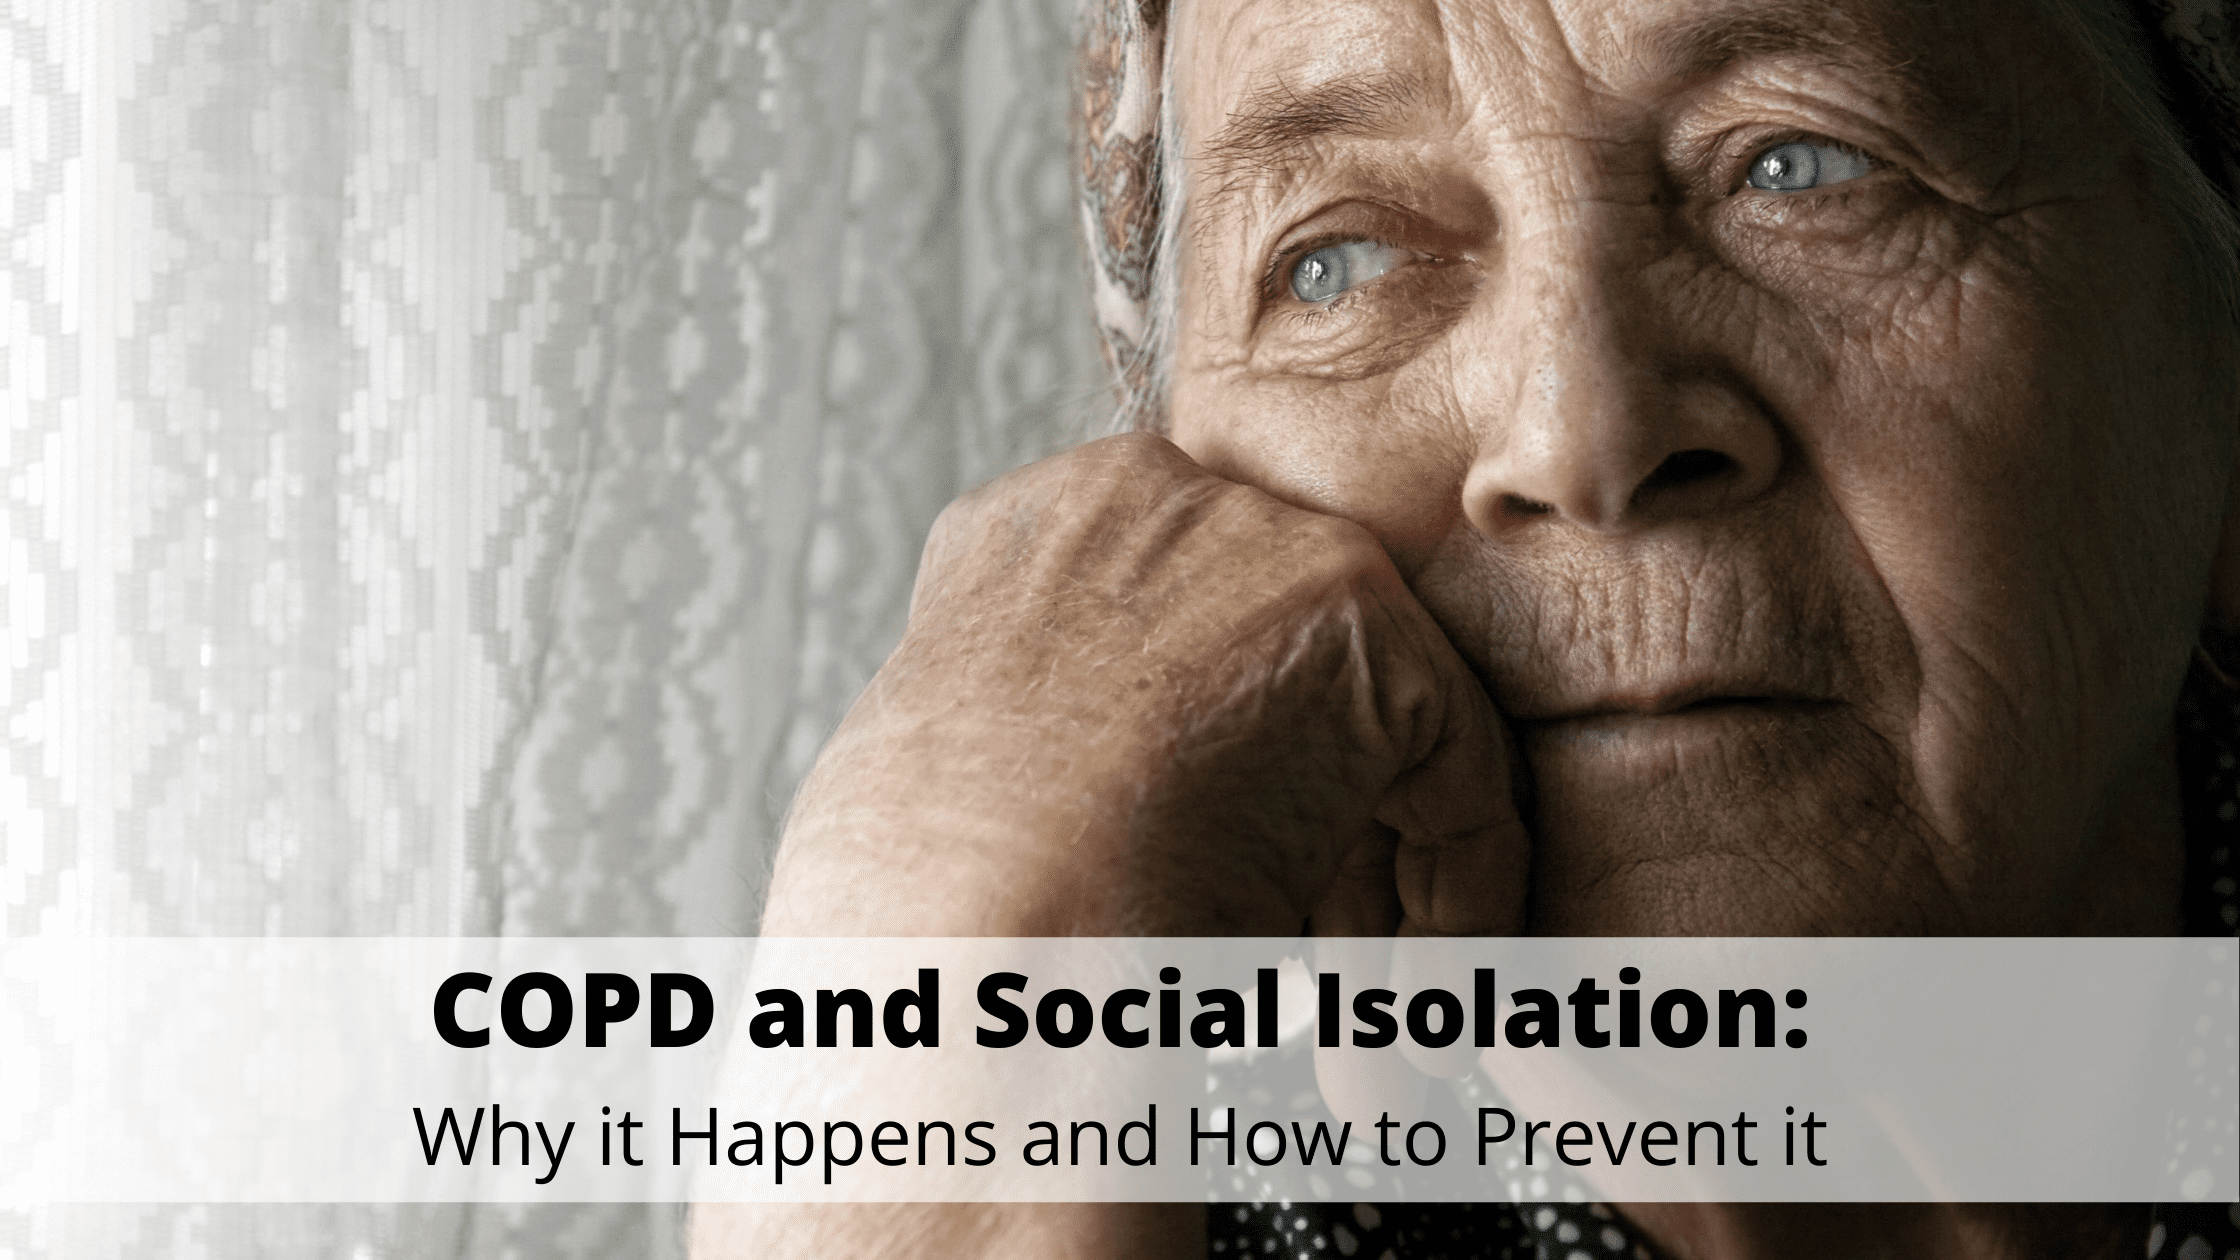 COPD and Social Isolation